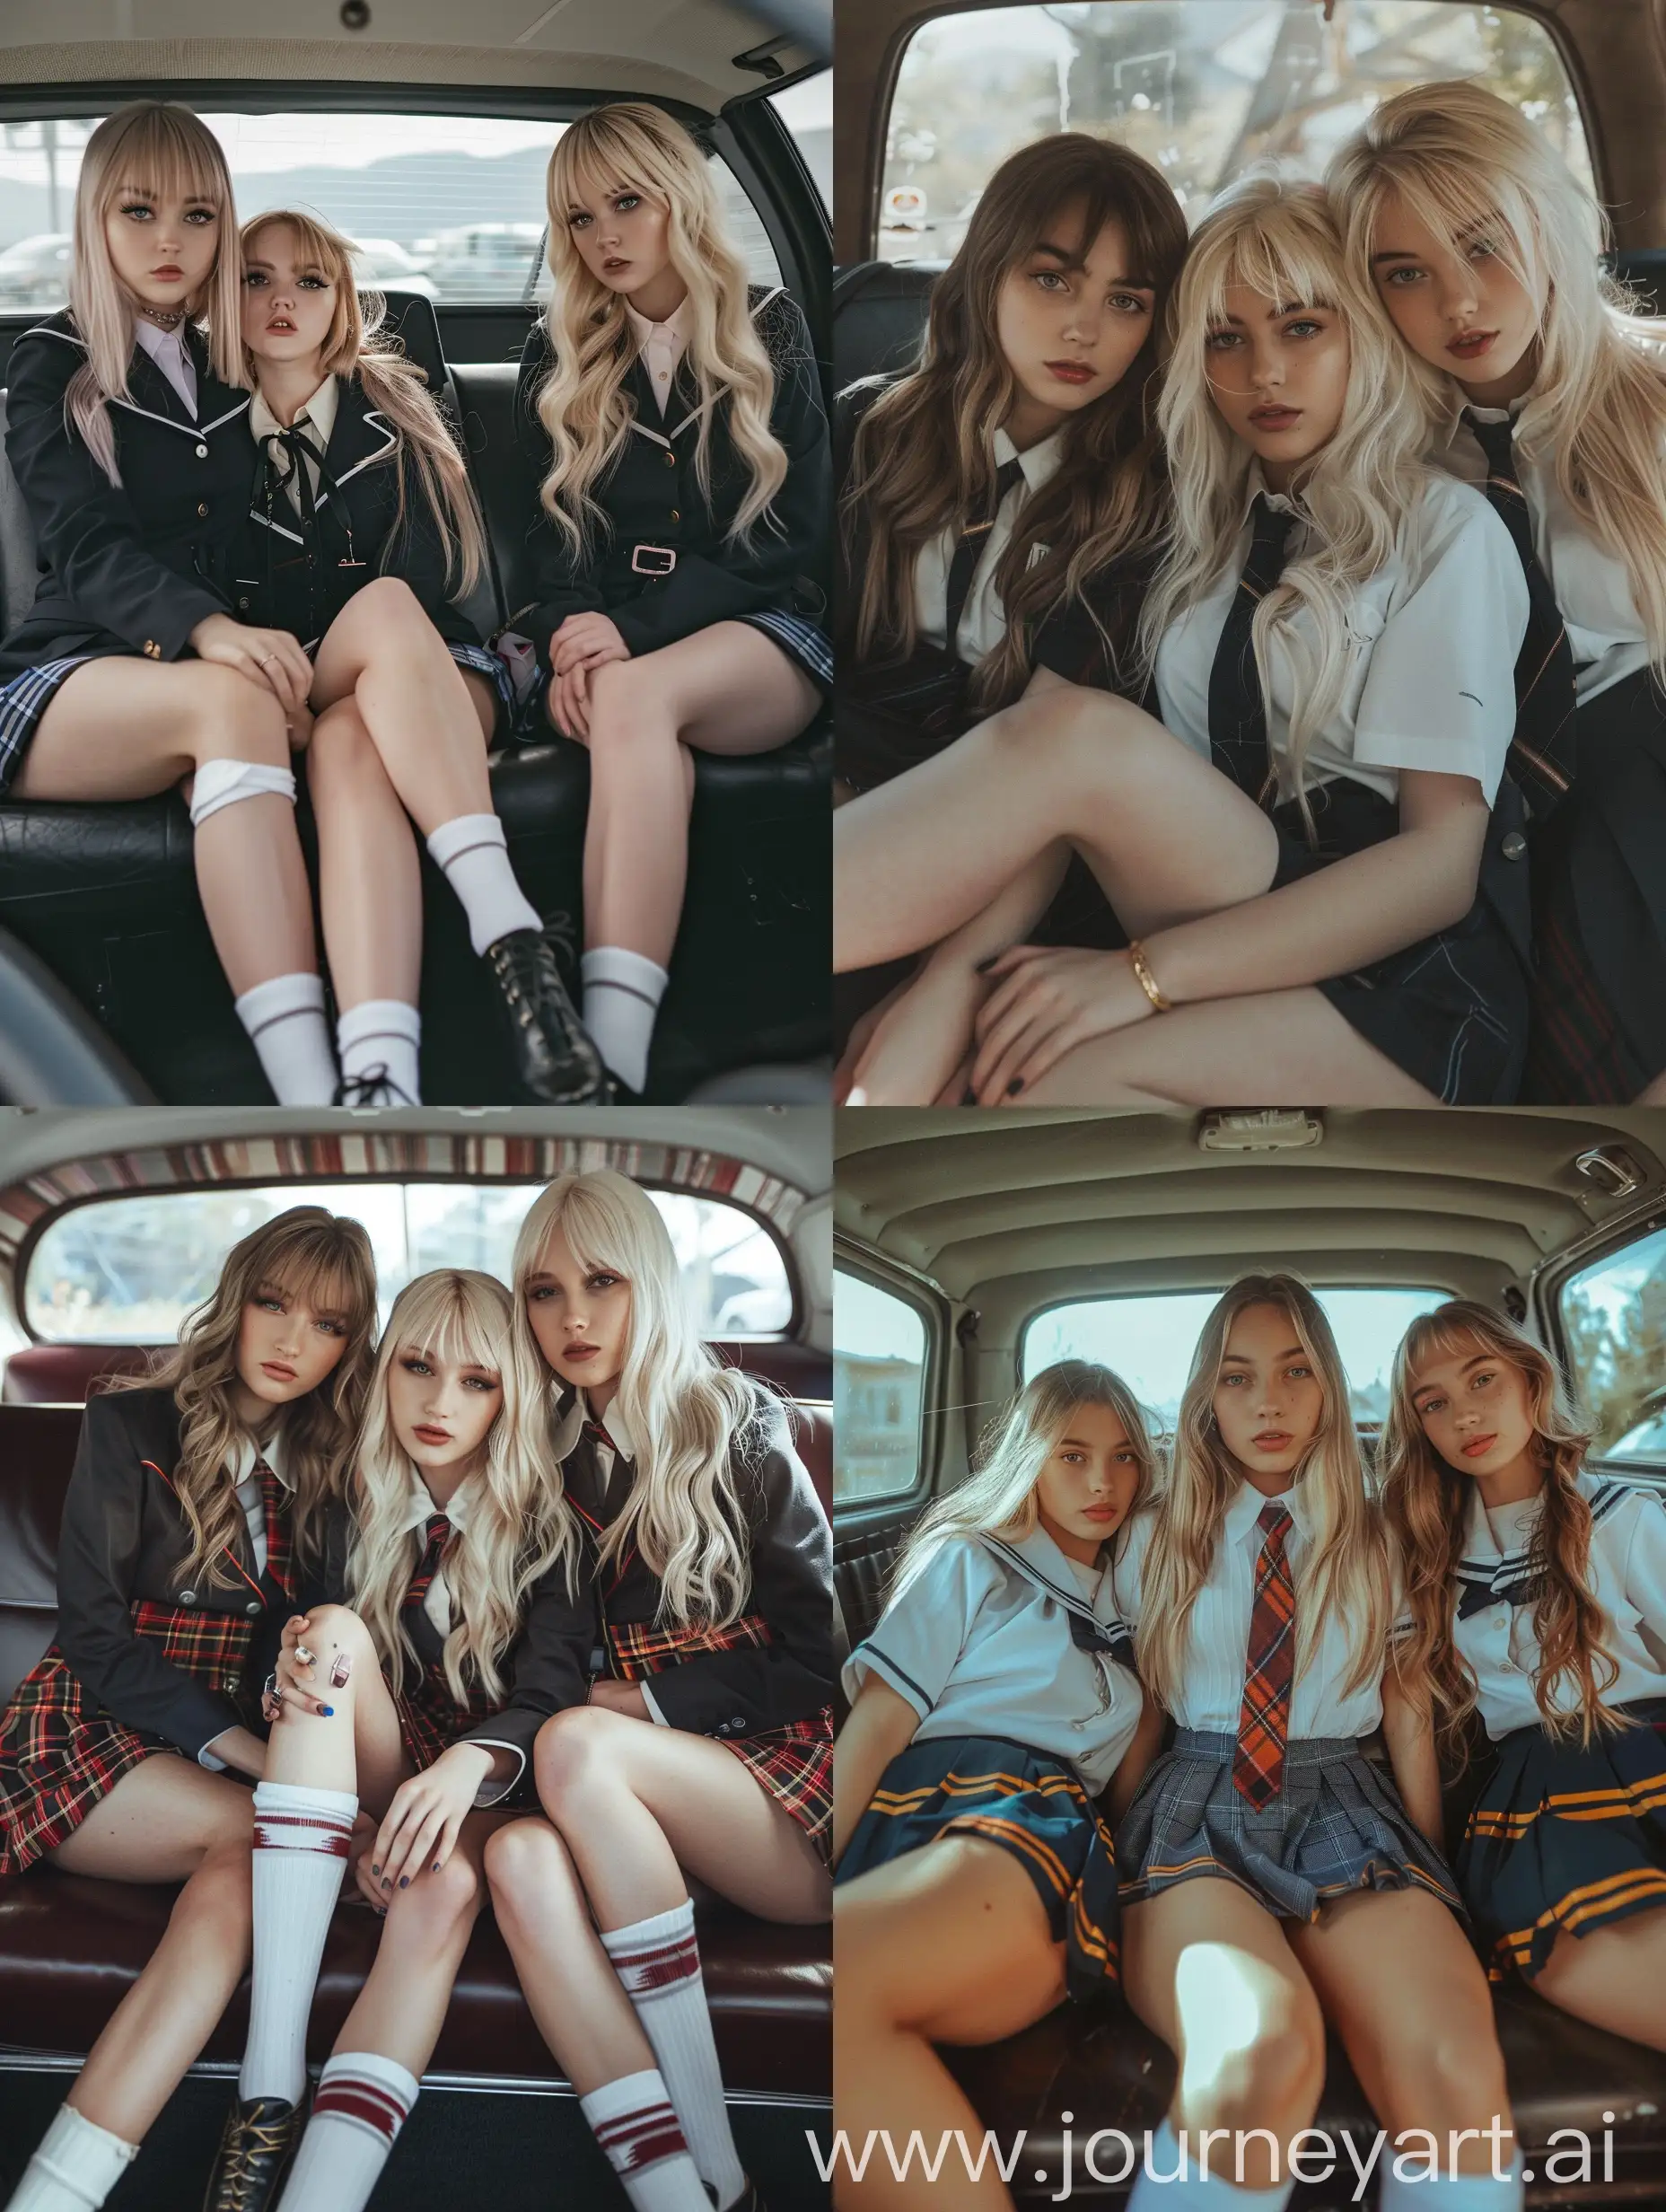 3 women, sitting, fat legs, blonde hair, 22 years old,  inside car, school uniform, , makeup, no filters, no effects, natural photo